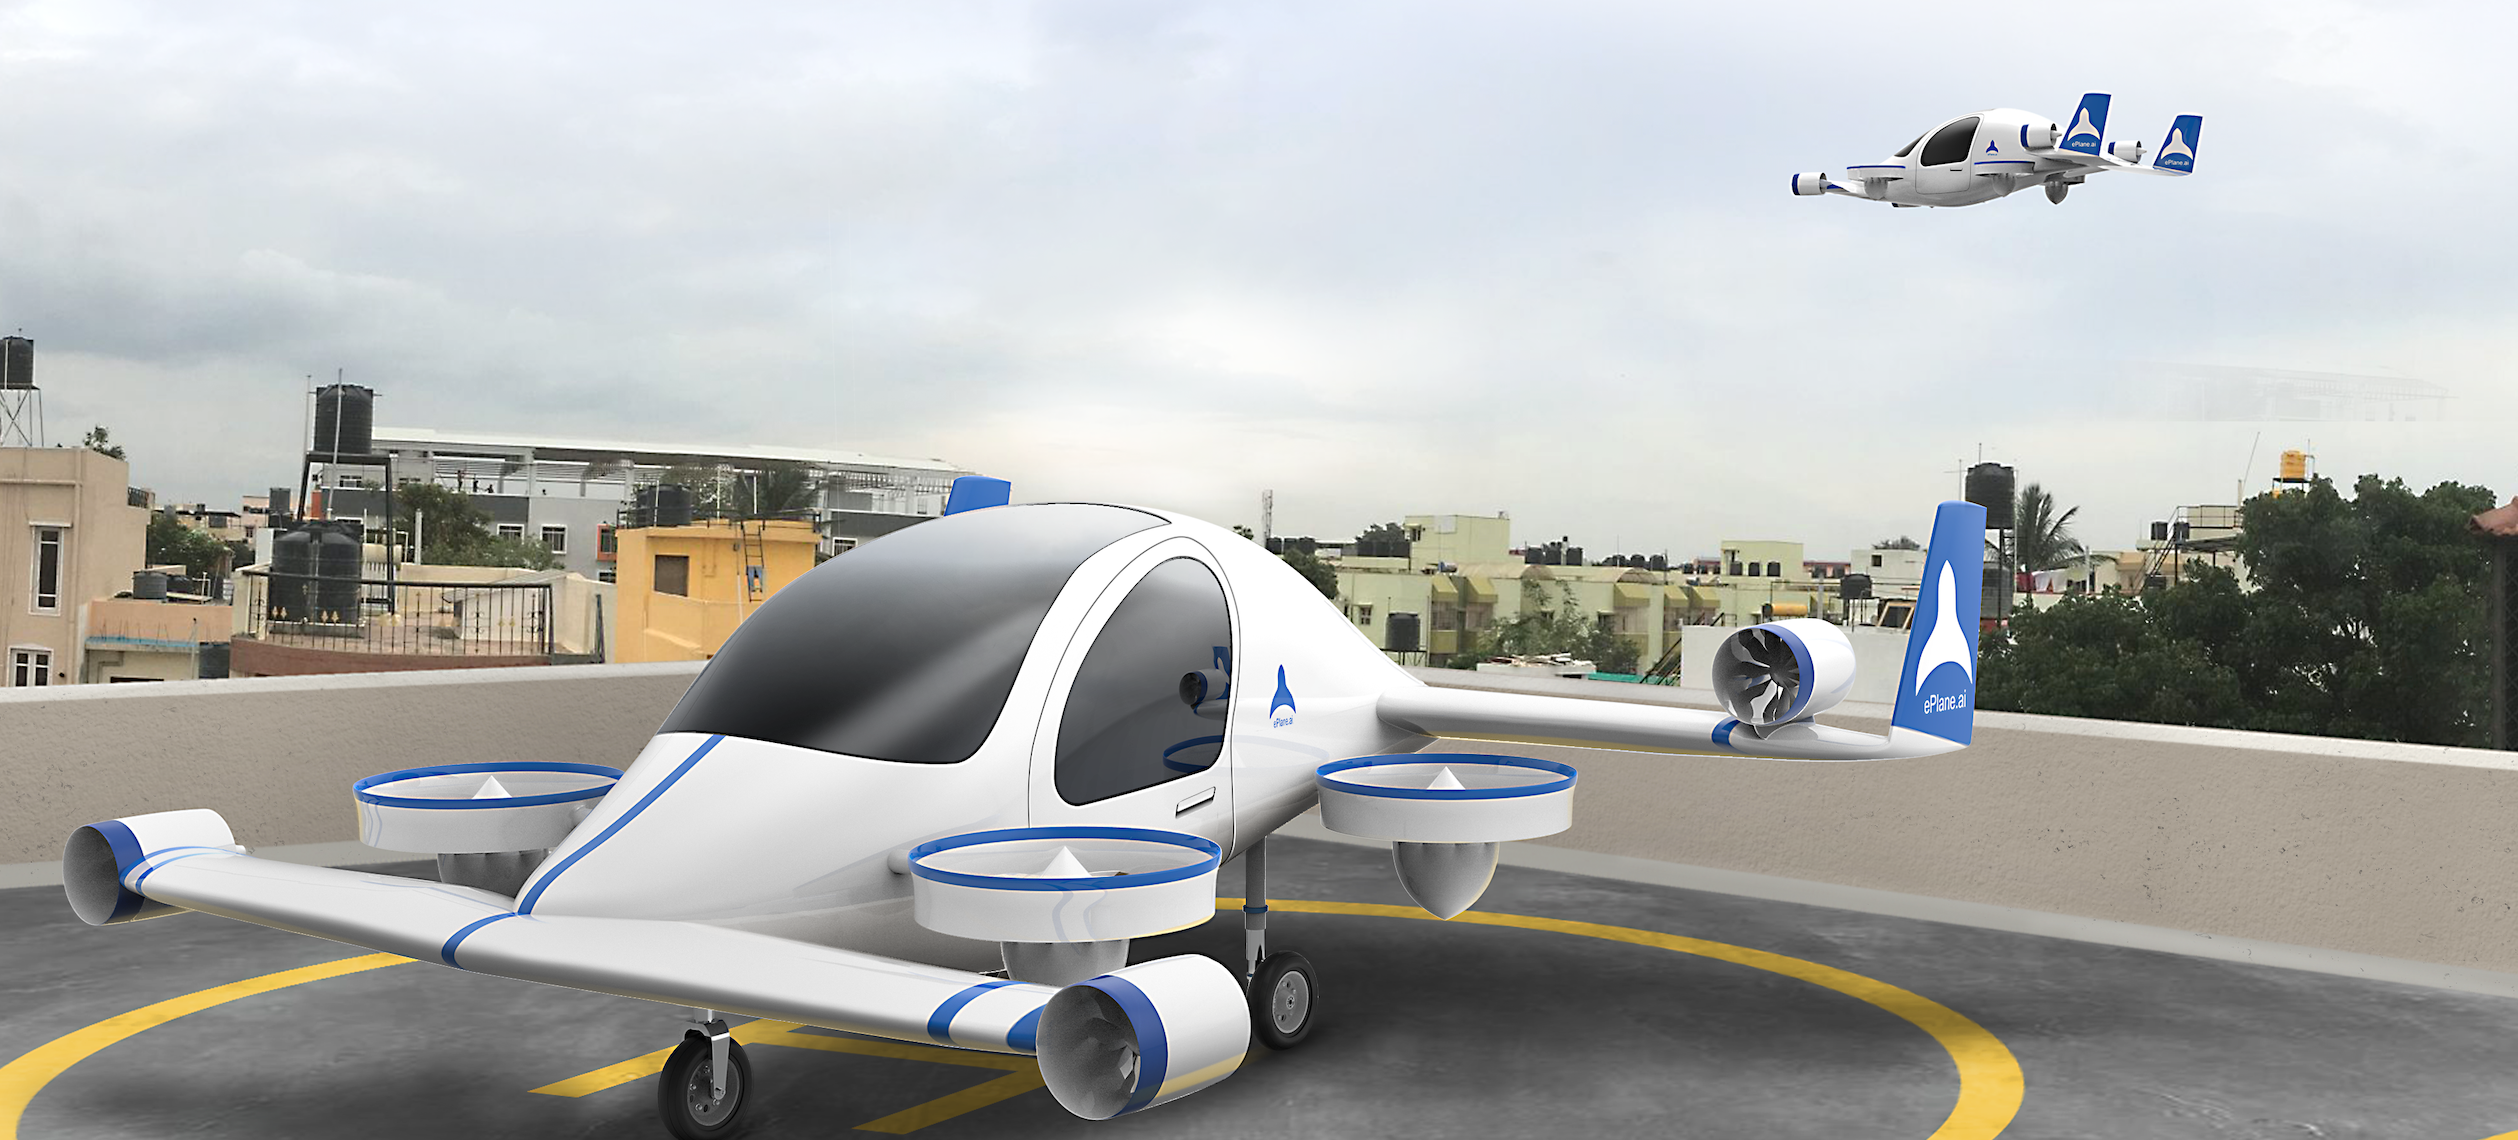 The ePlane aims to develop electric air taxi prototype by March 2025